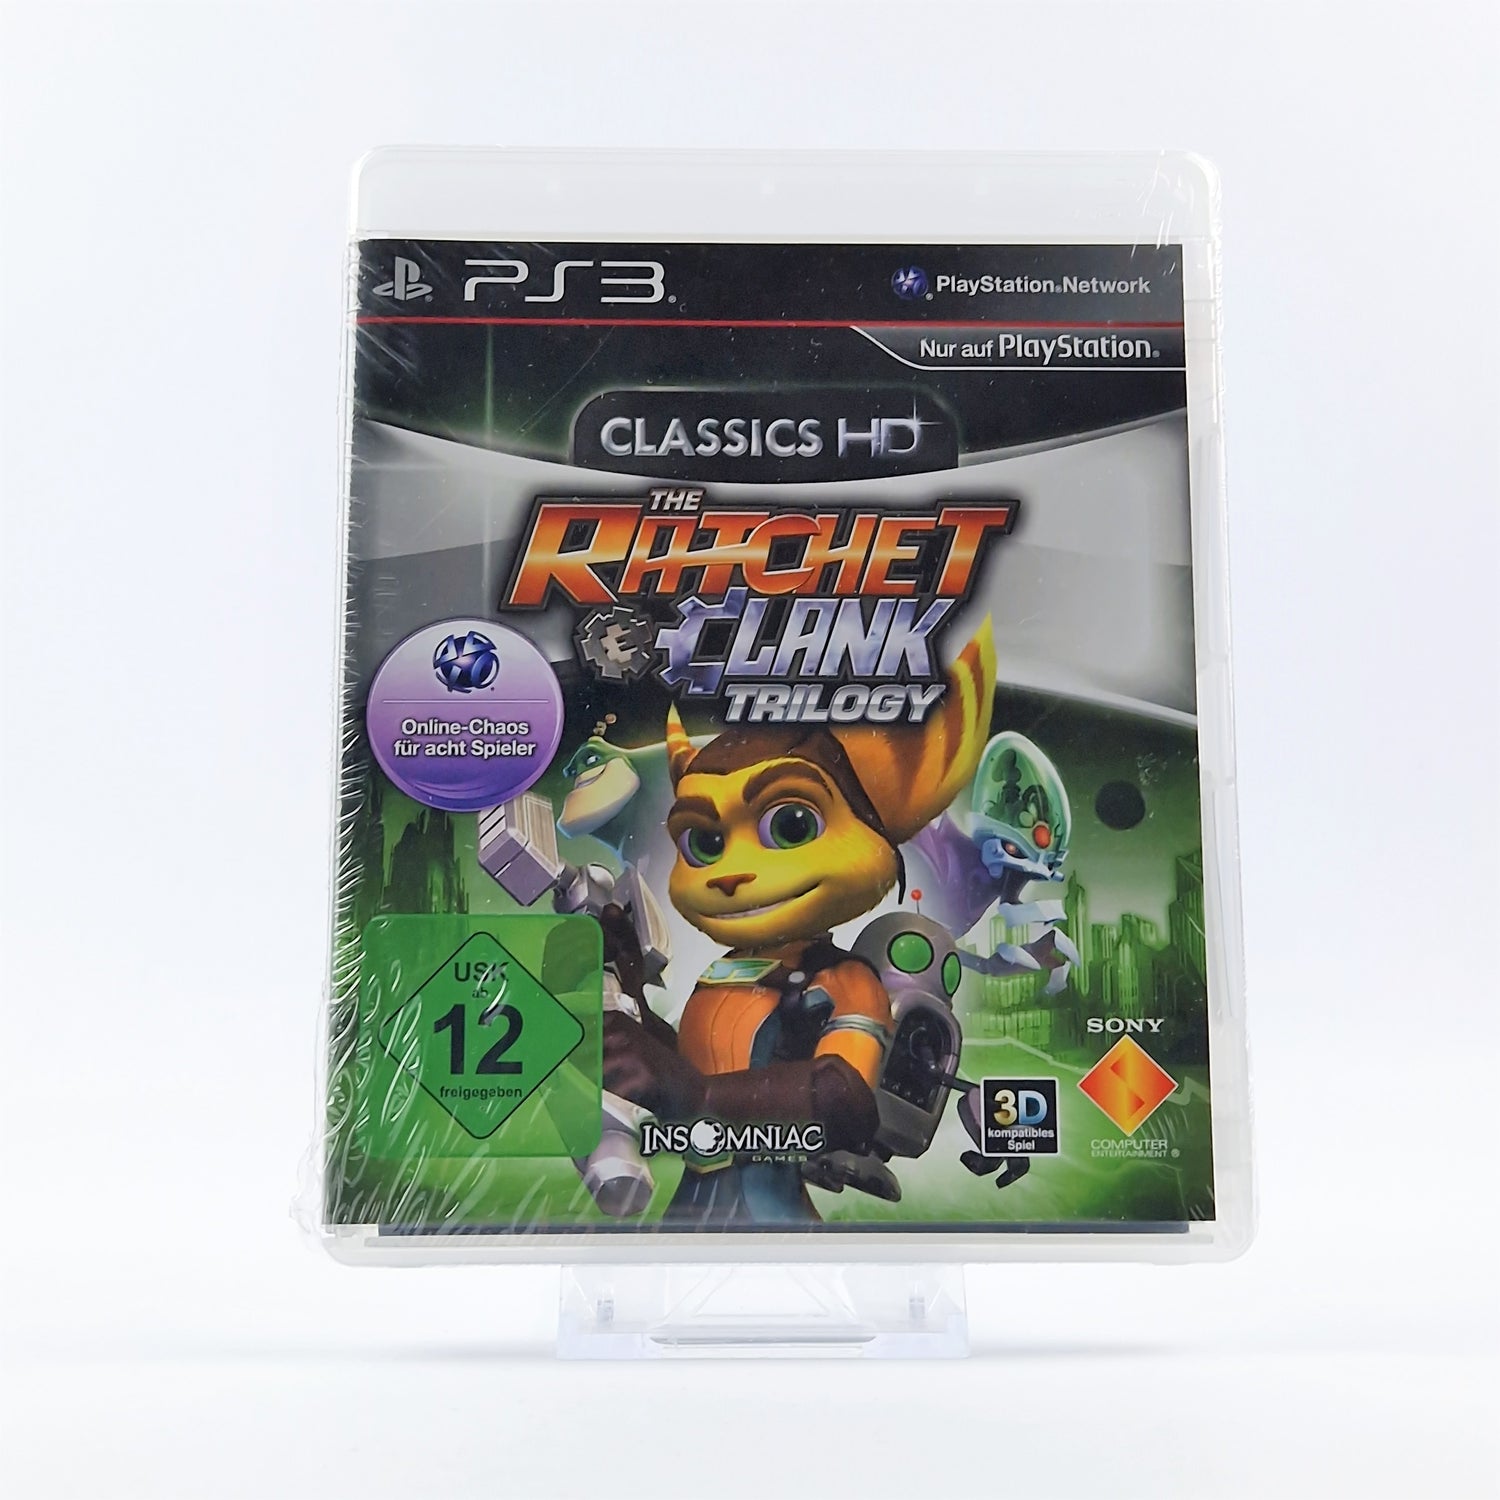 Playstation 3 Game : The Ratchet & Clank Trilogy - Sony PS3 - NEW RESEALED